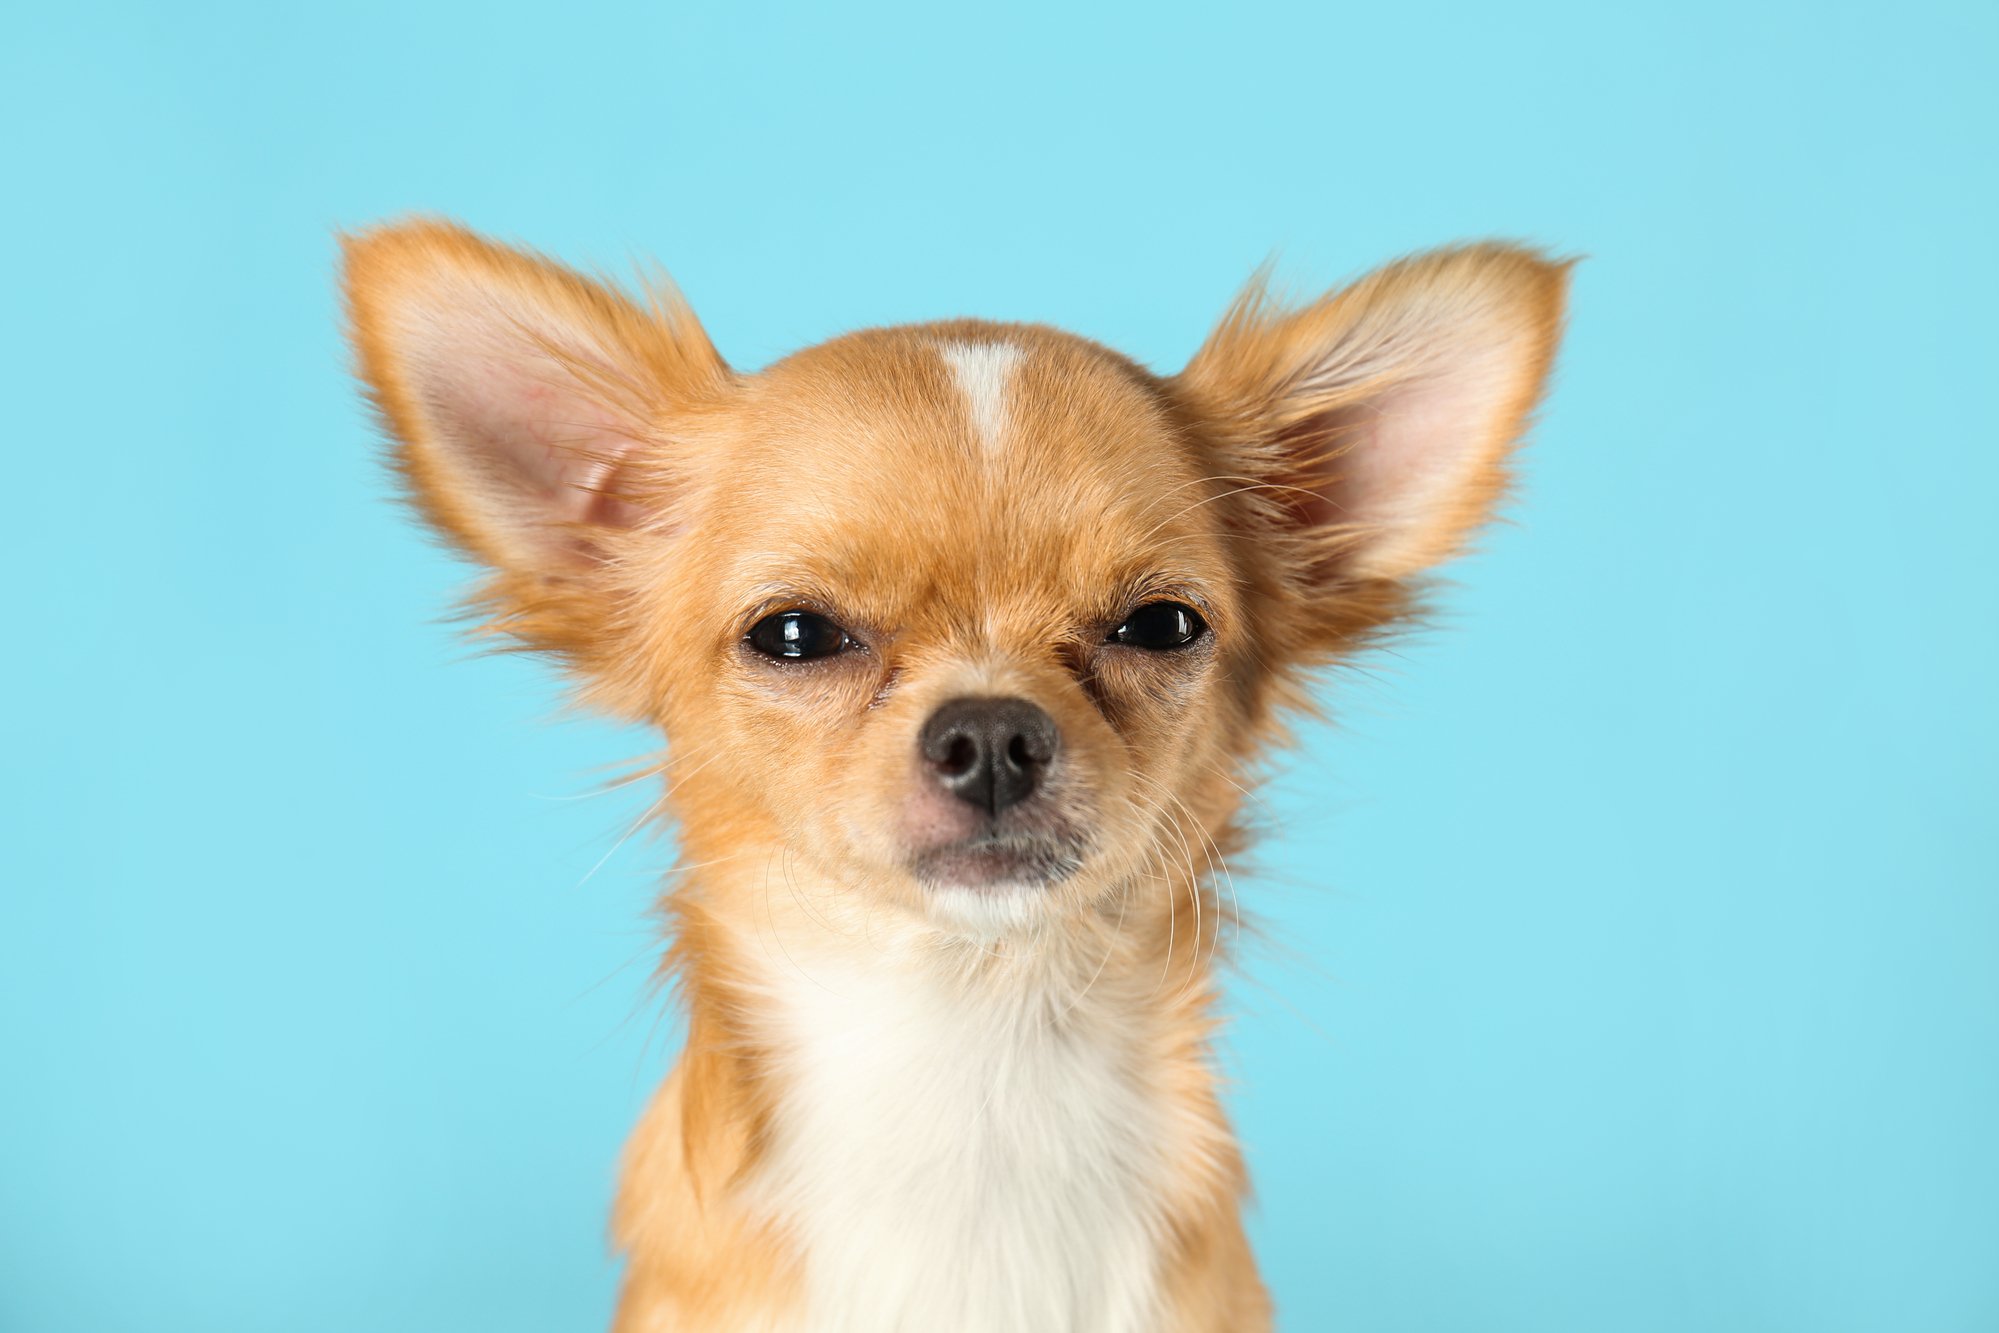 Cute small Chihuahua dog on light blue background